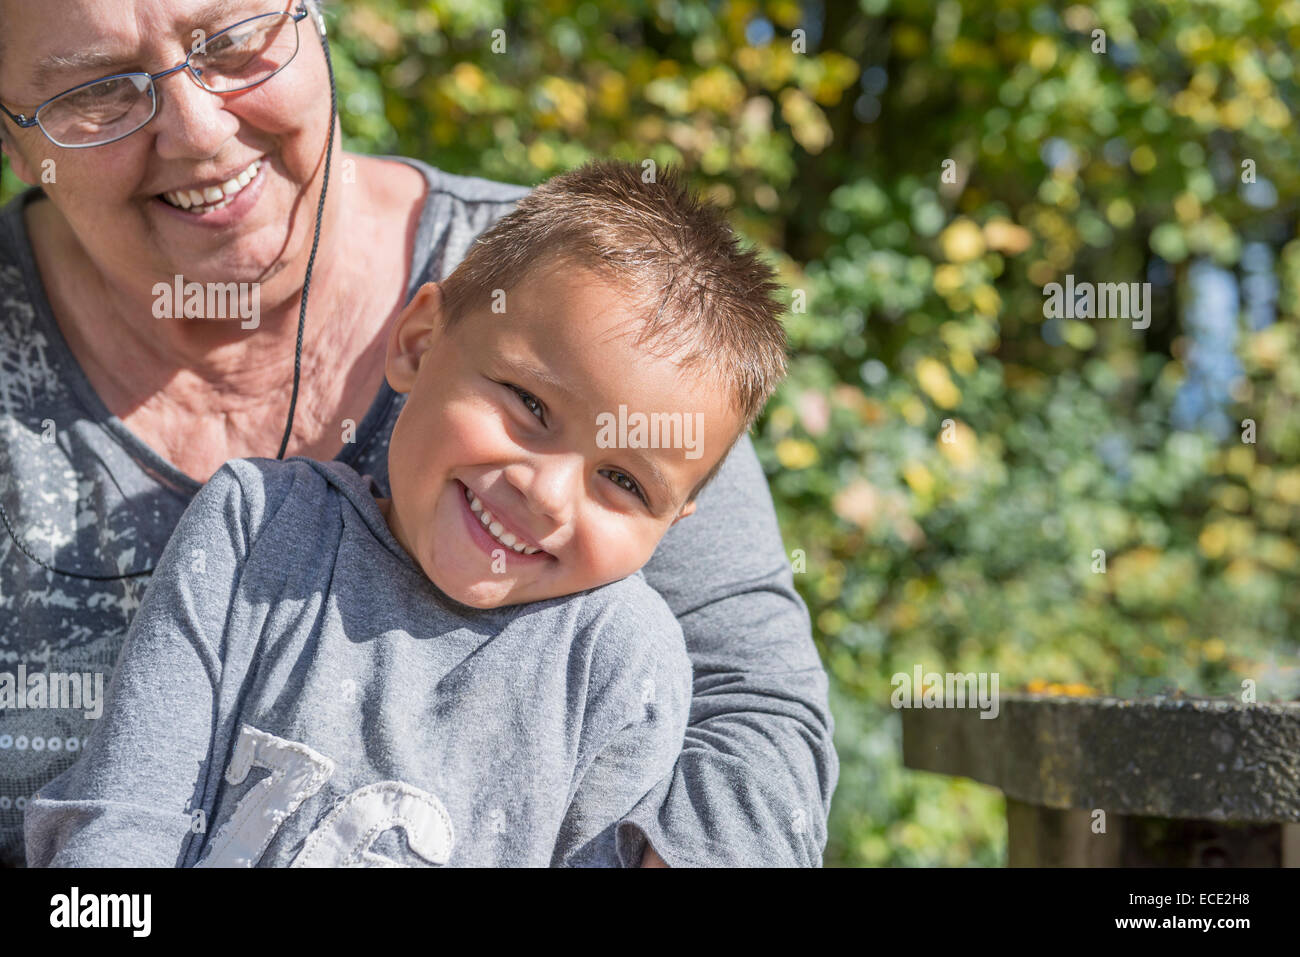 Small young boy sitting on grandmothers knee Stock Photo